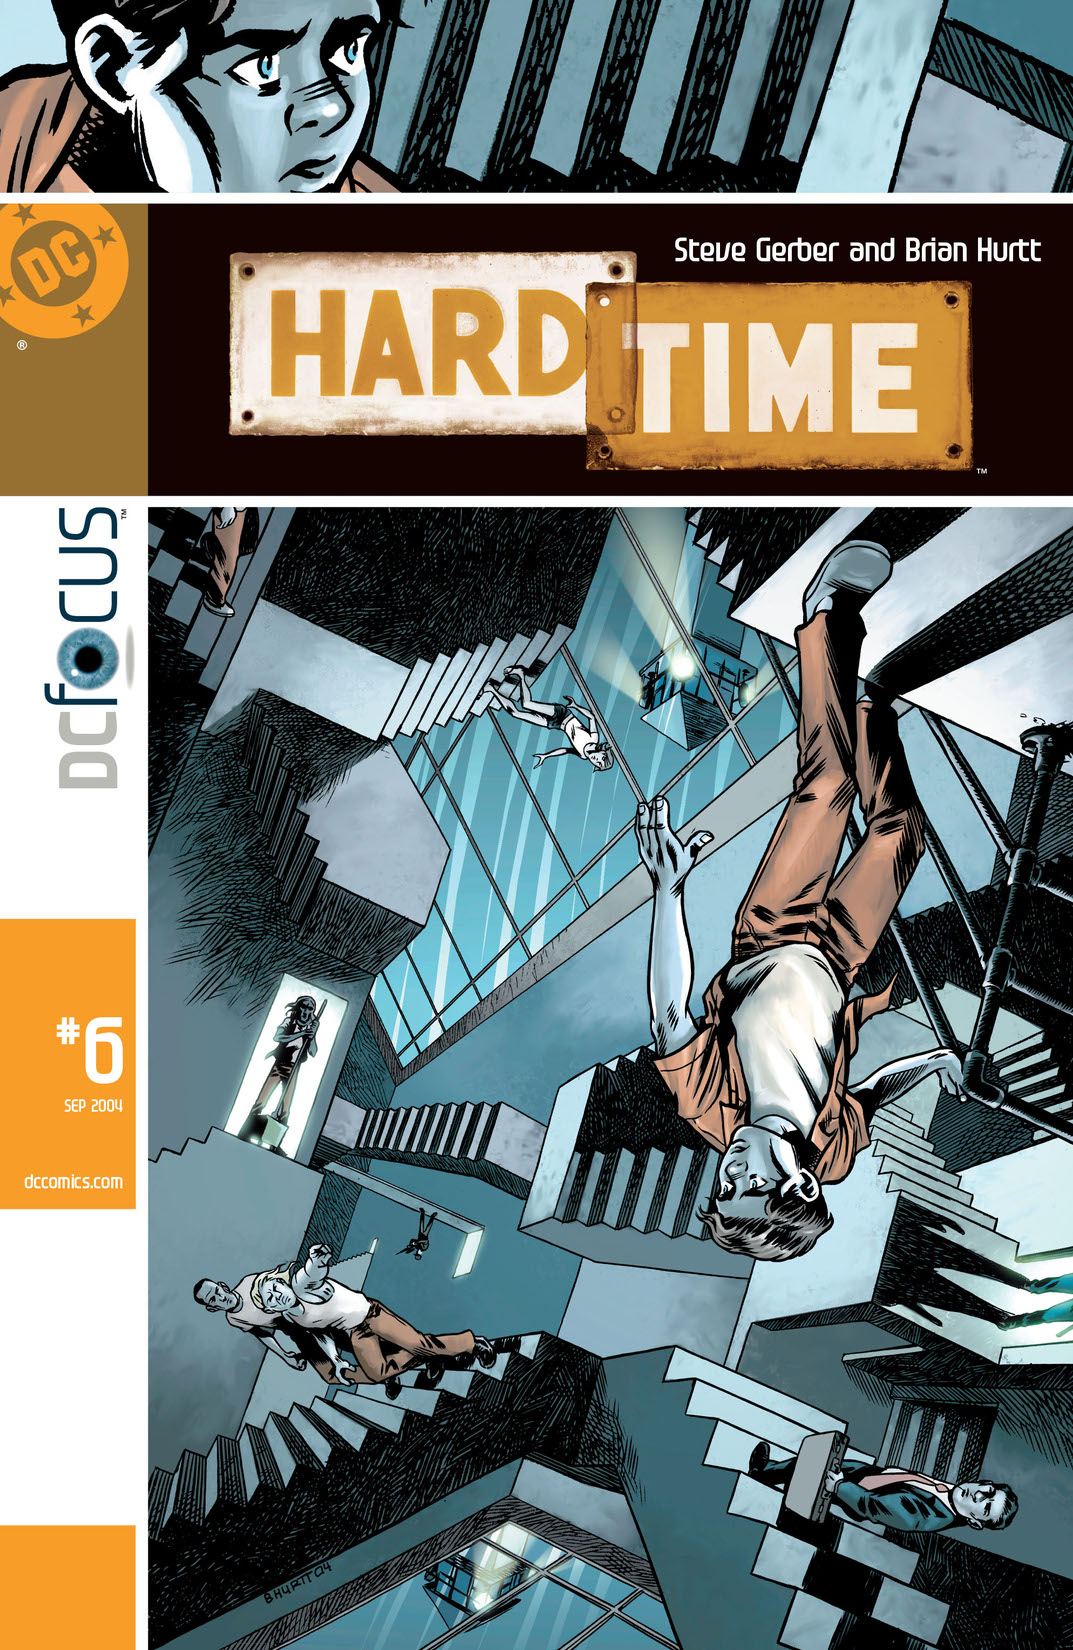 Hard Time #6 preview images